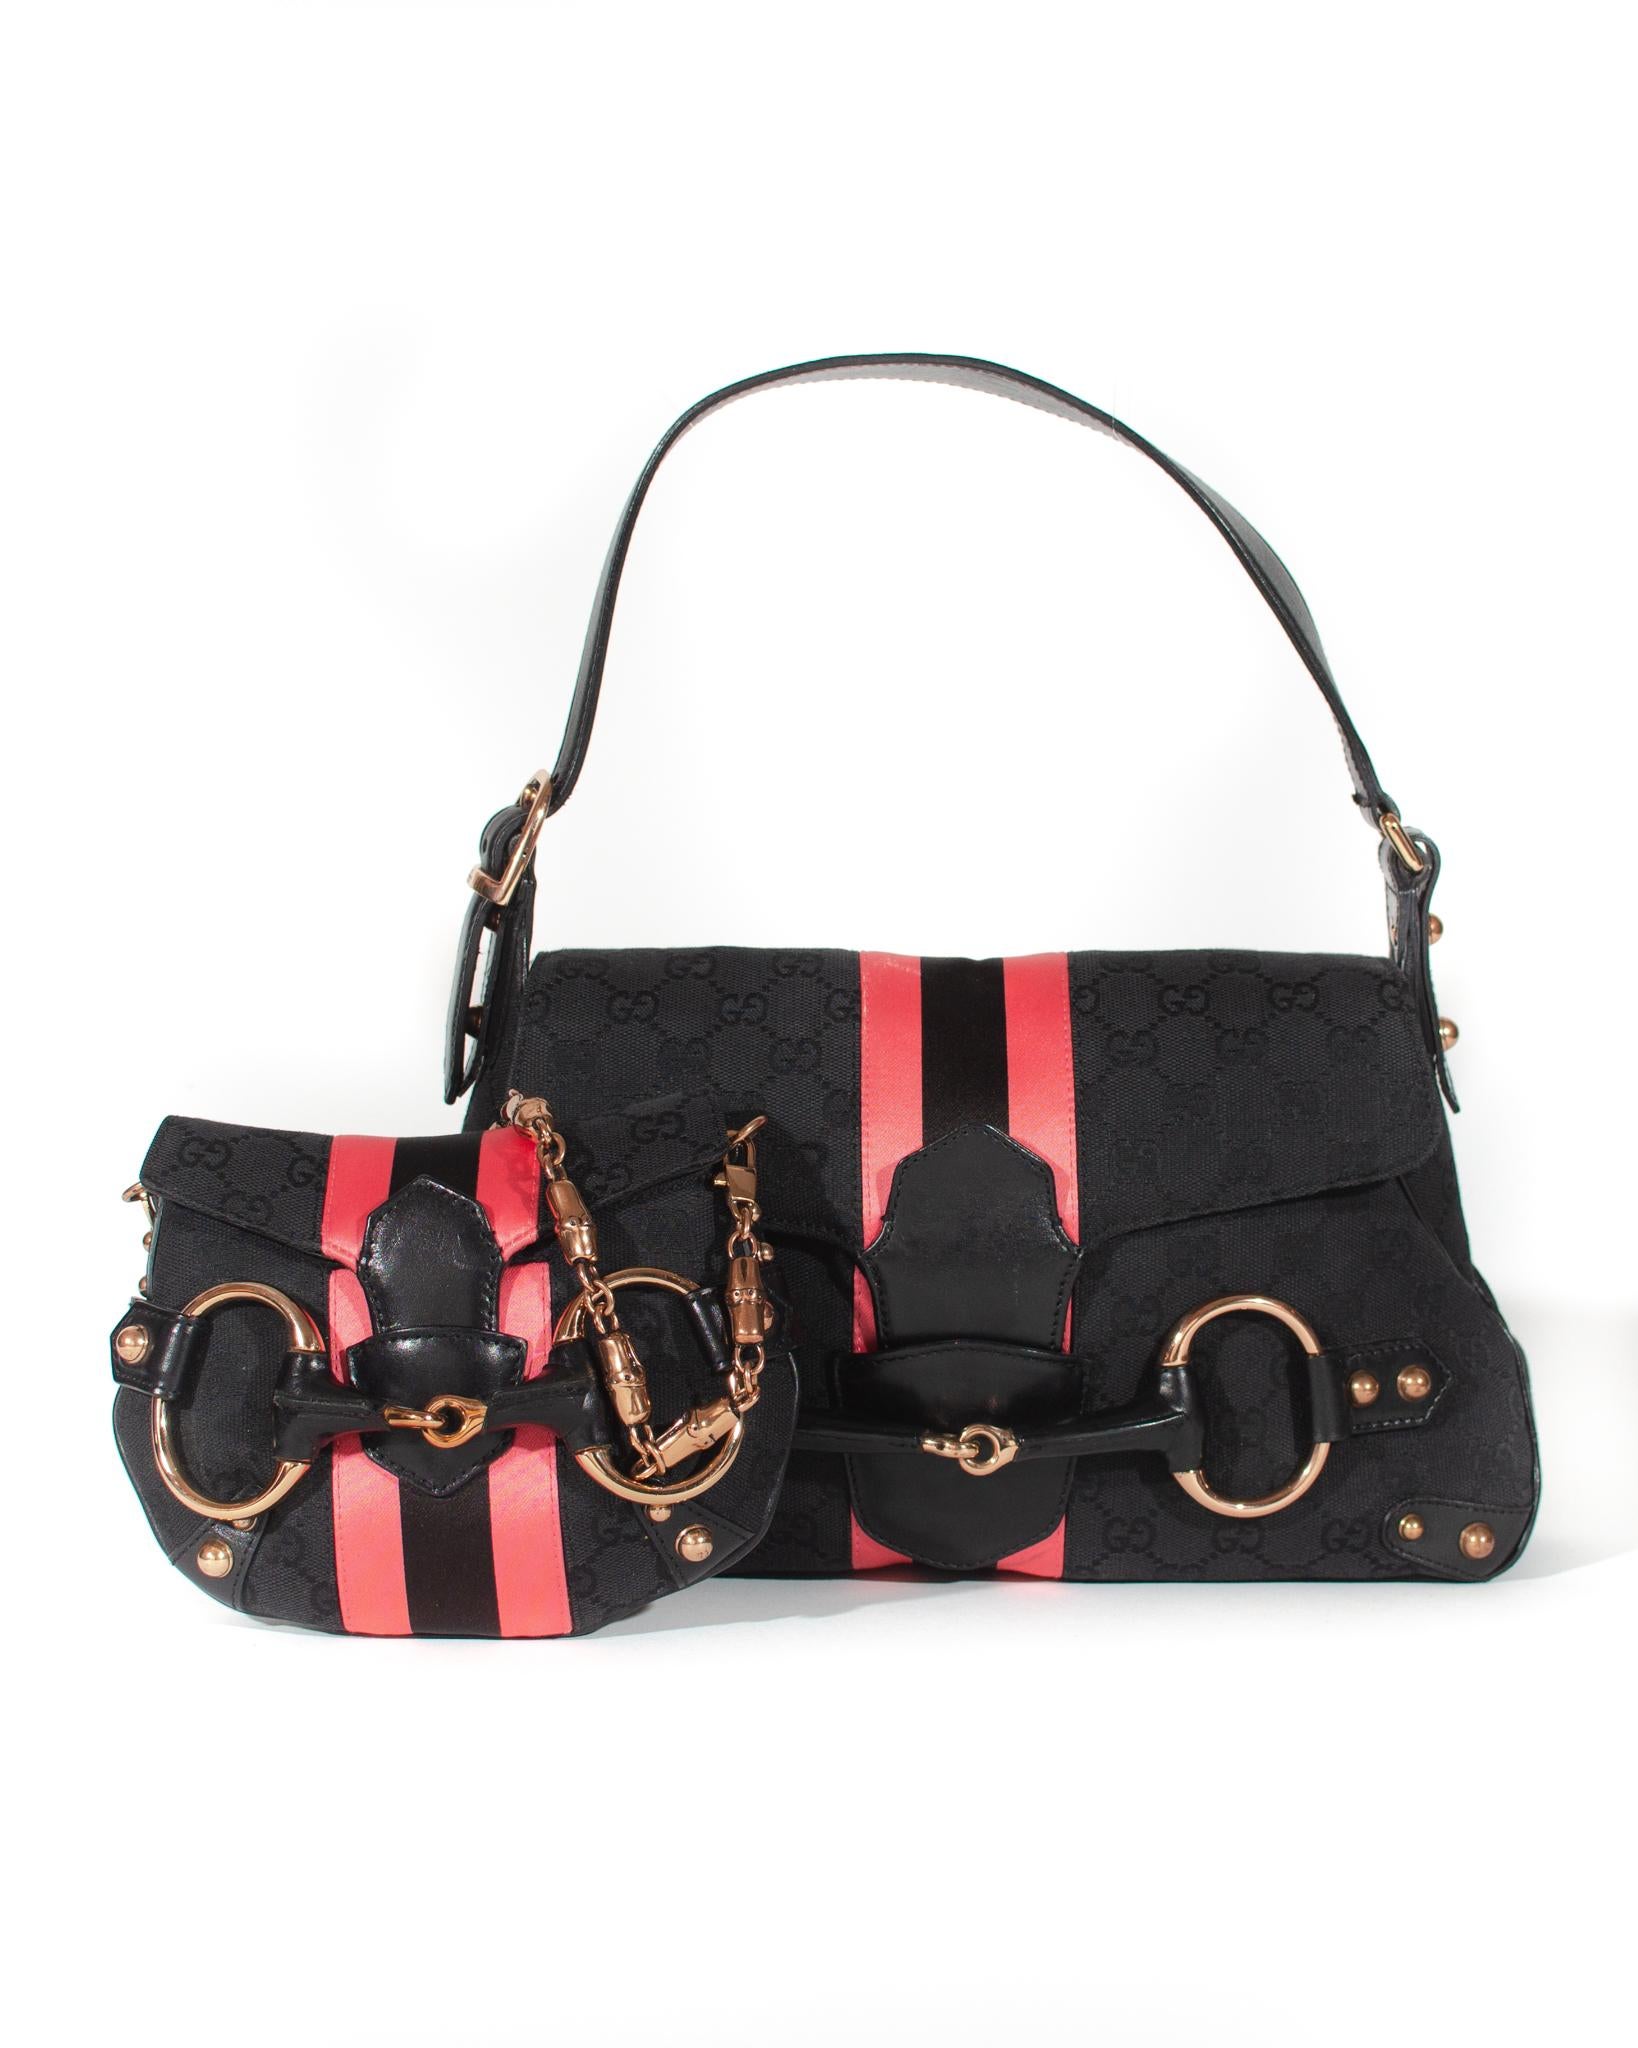 Designed by Tom Ford during his tenure at the house of Gucci, this bag represents Tom's interpretation of many of Gucci's classic elements ('GG' canvas, horse bits, etc.). This shoulder bag is constructed of black 'GG' canvas with a large black and